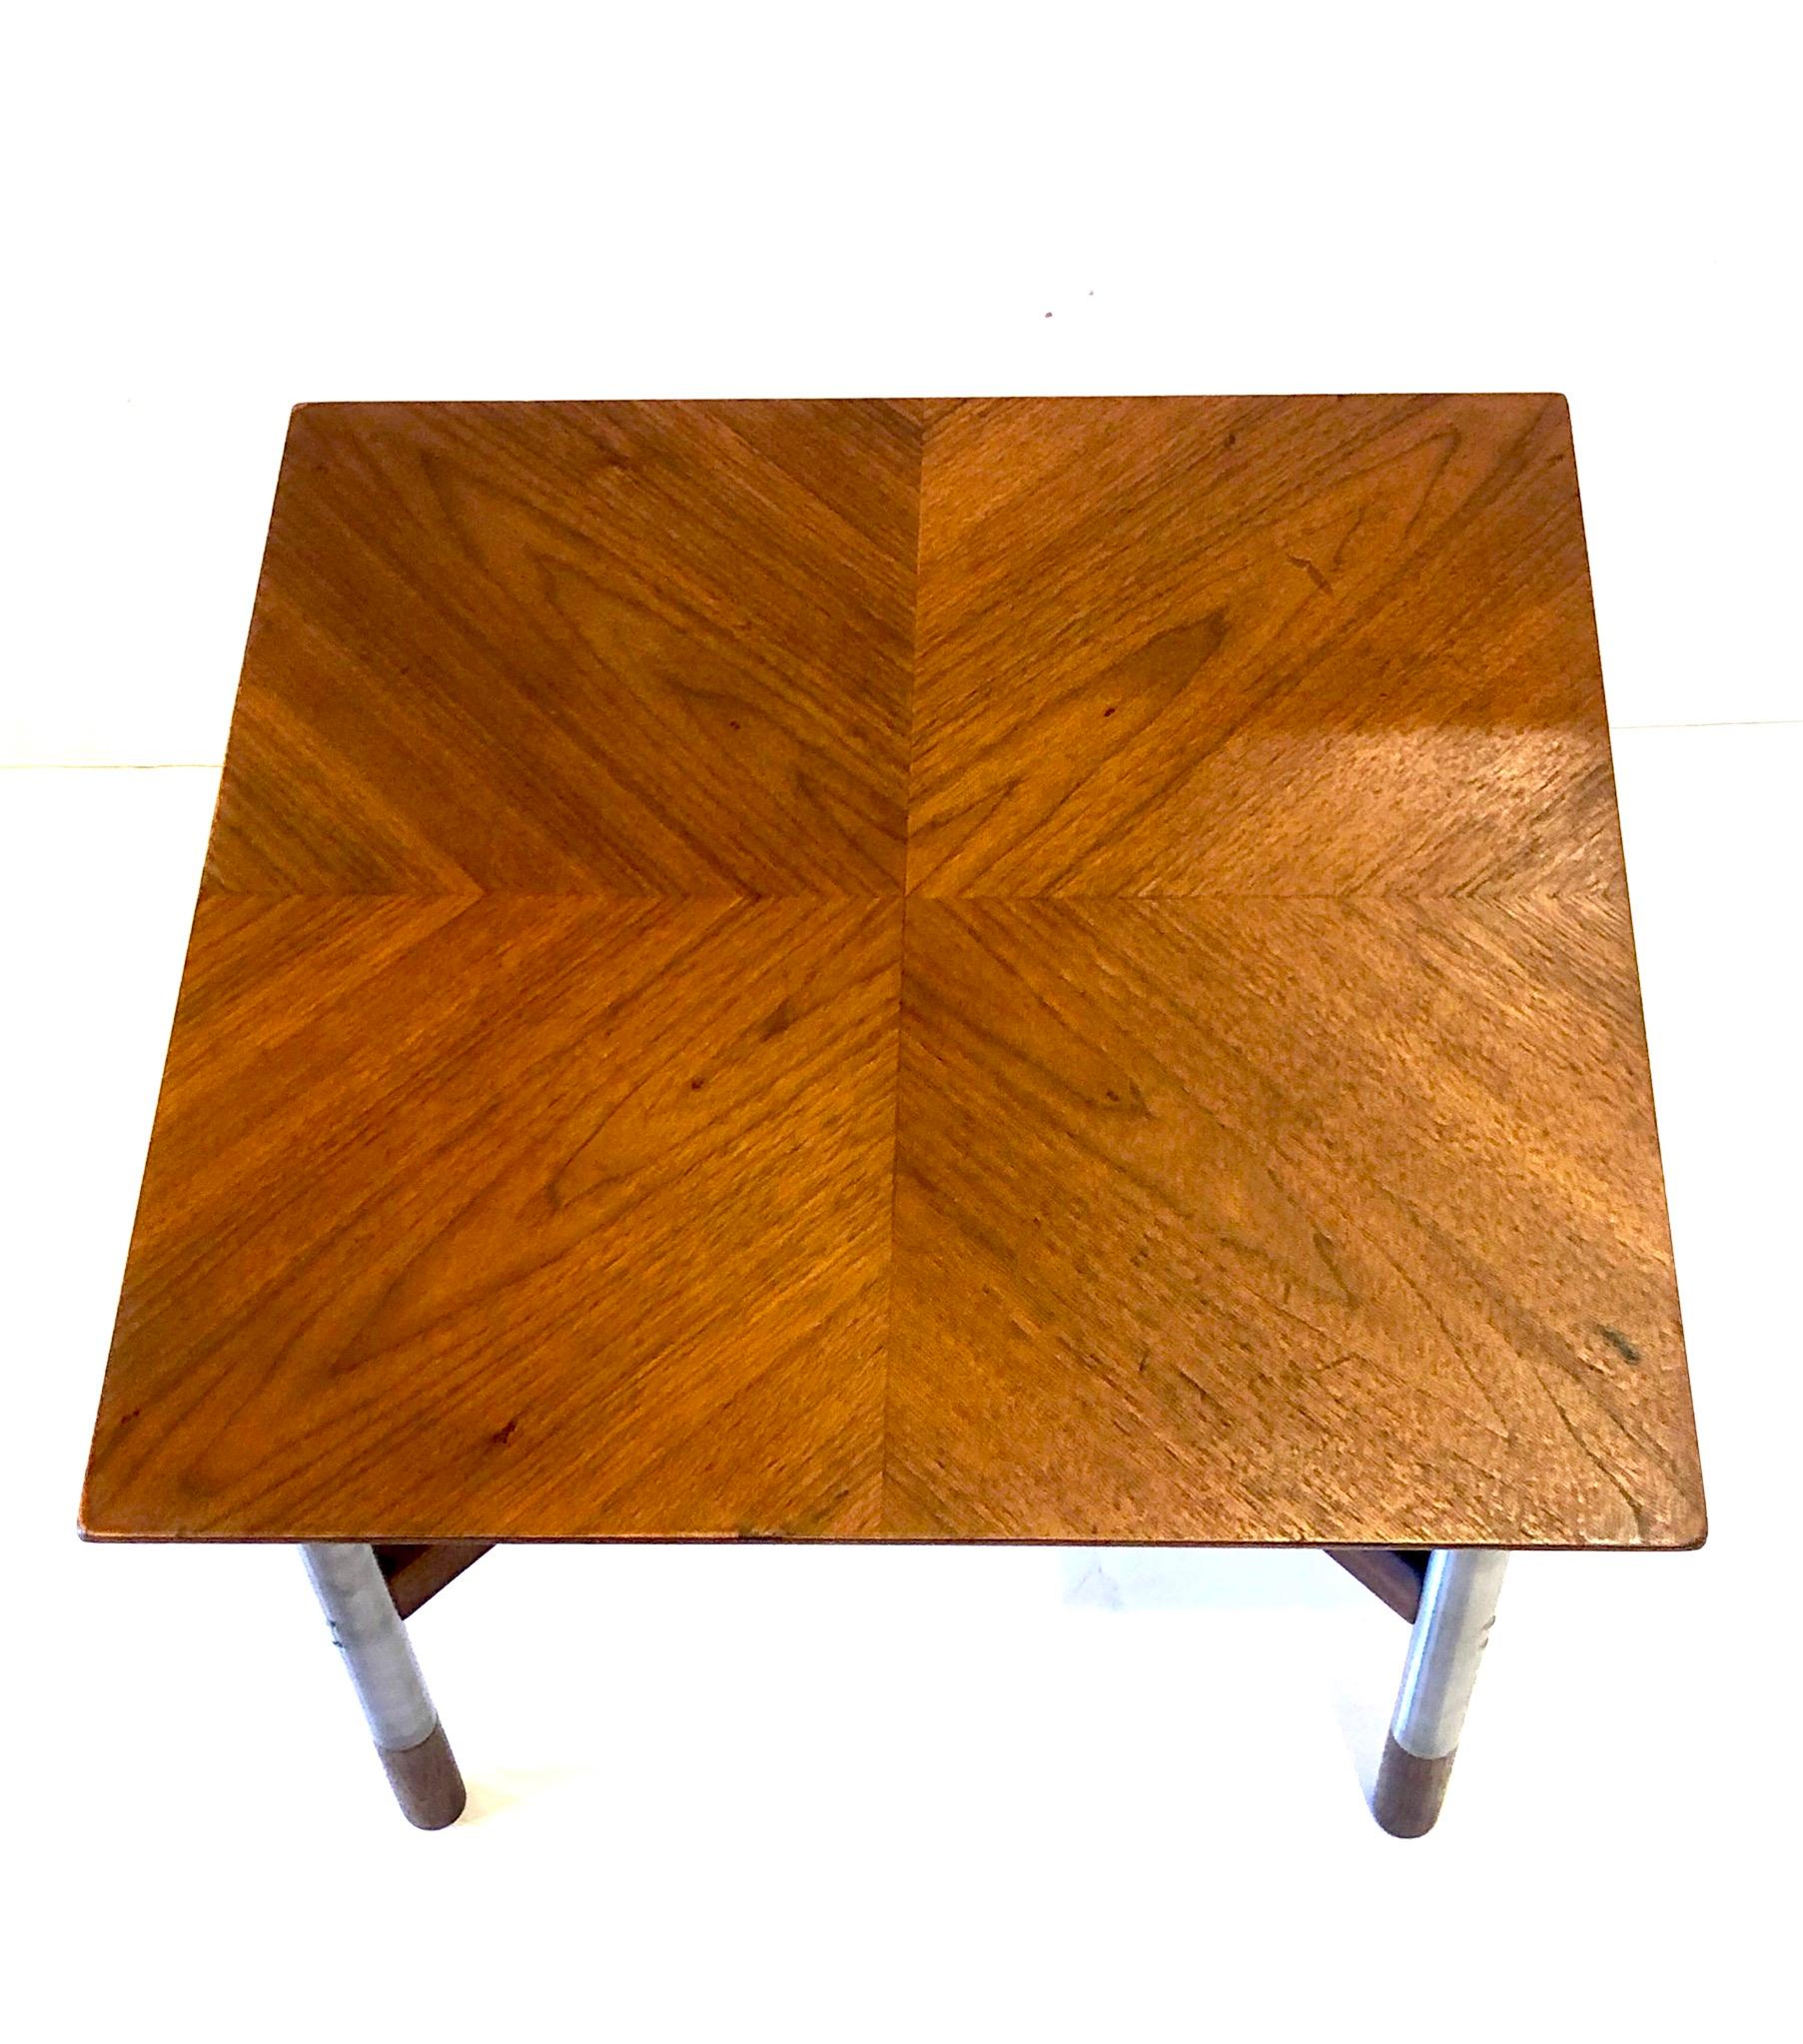 Scandinavian Modern Petite & Rare Teak Cocktail Square Table with Stainless Steel Legs and Wood Tips For Sale